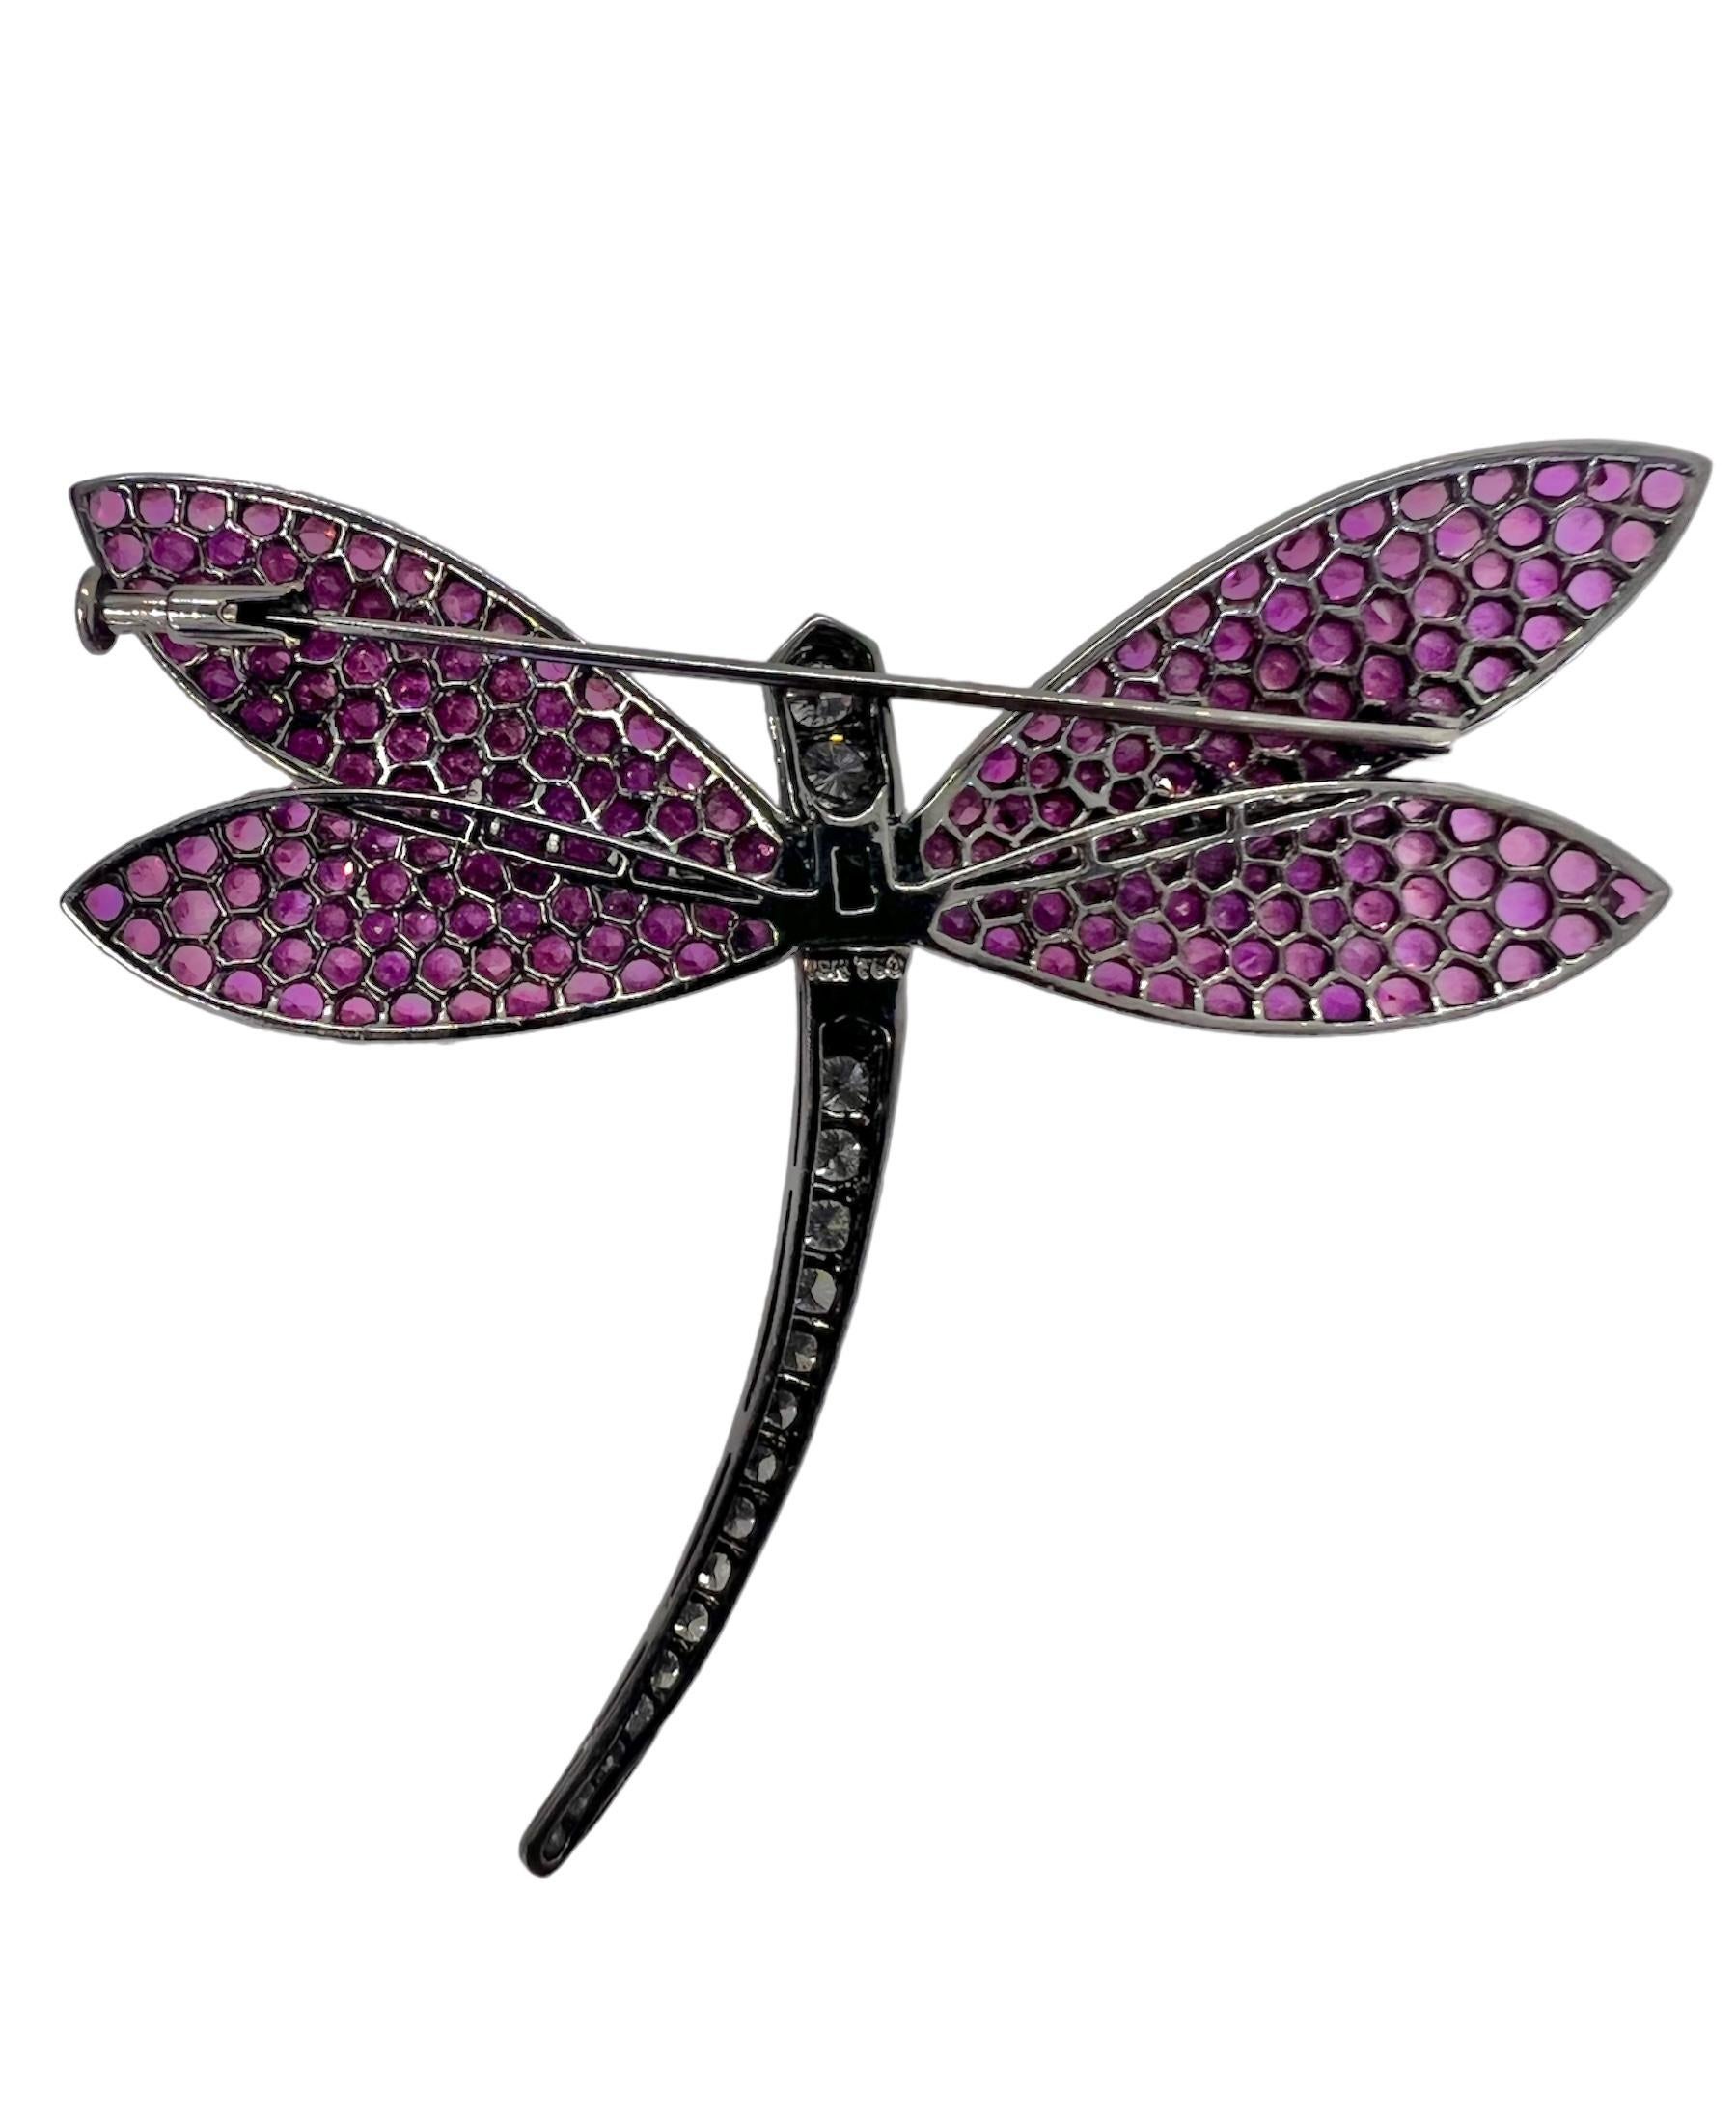 A Dragonfly platinum brooch with 9.40 carats of pink sapphire and 1.23 carats of diamond.

Sophia D by Joseph Dardashti LTD has been known worldwide for 35 years and are inspired by classic Art Deco design that merges with modern manufacturing